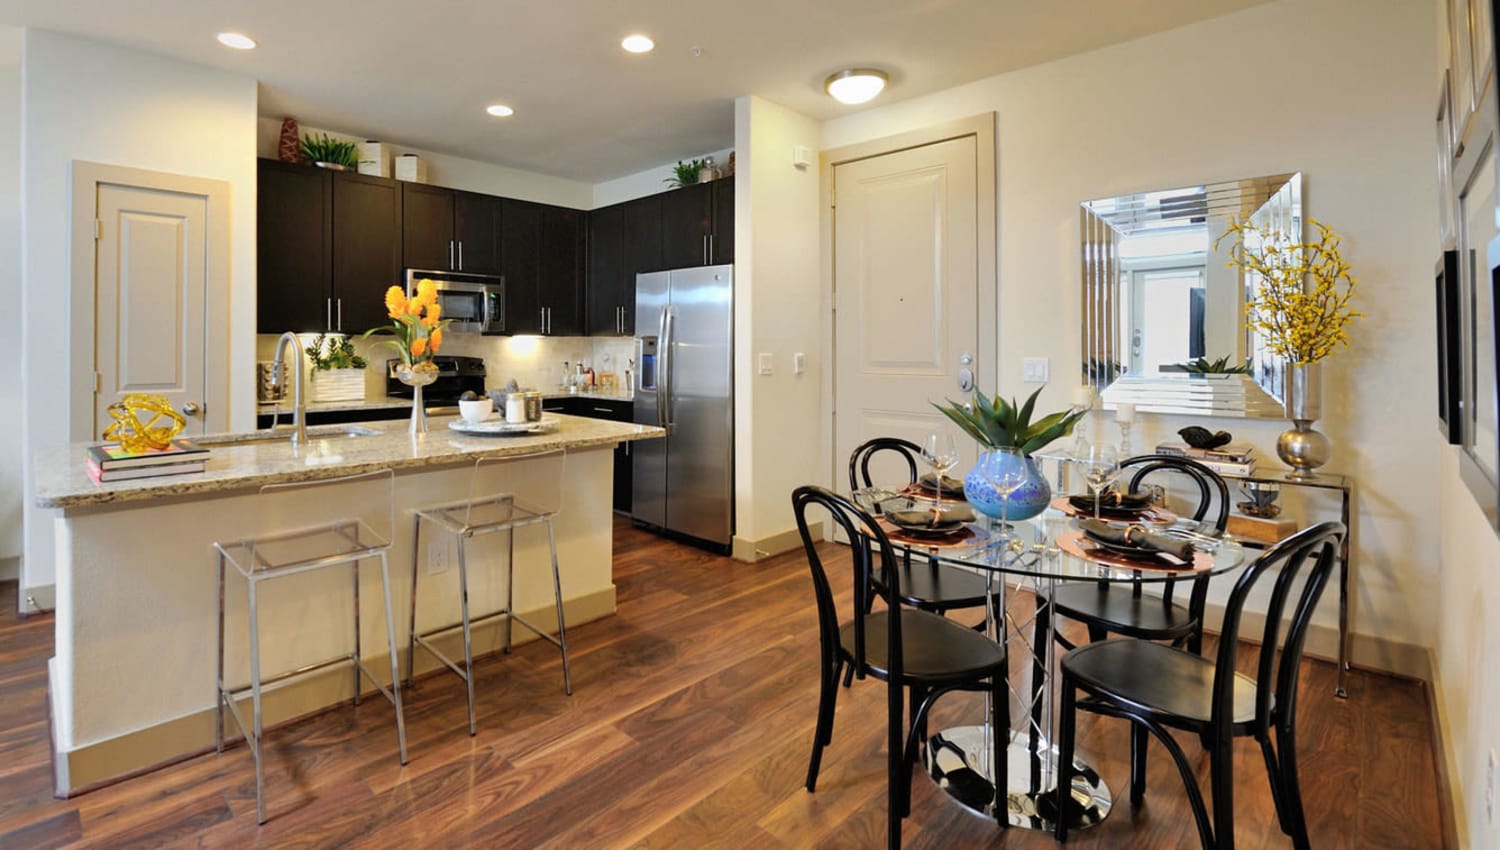 Dining table and kitchen area at Olympus Falcon Landing in Katy, Texas